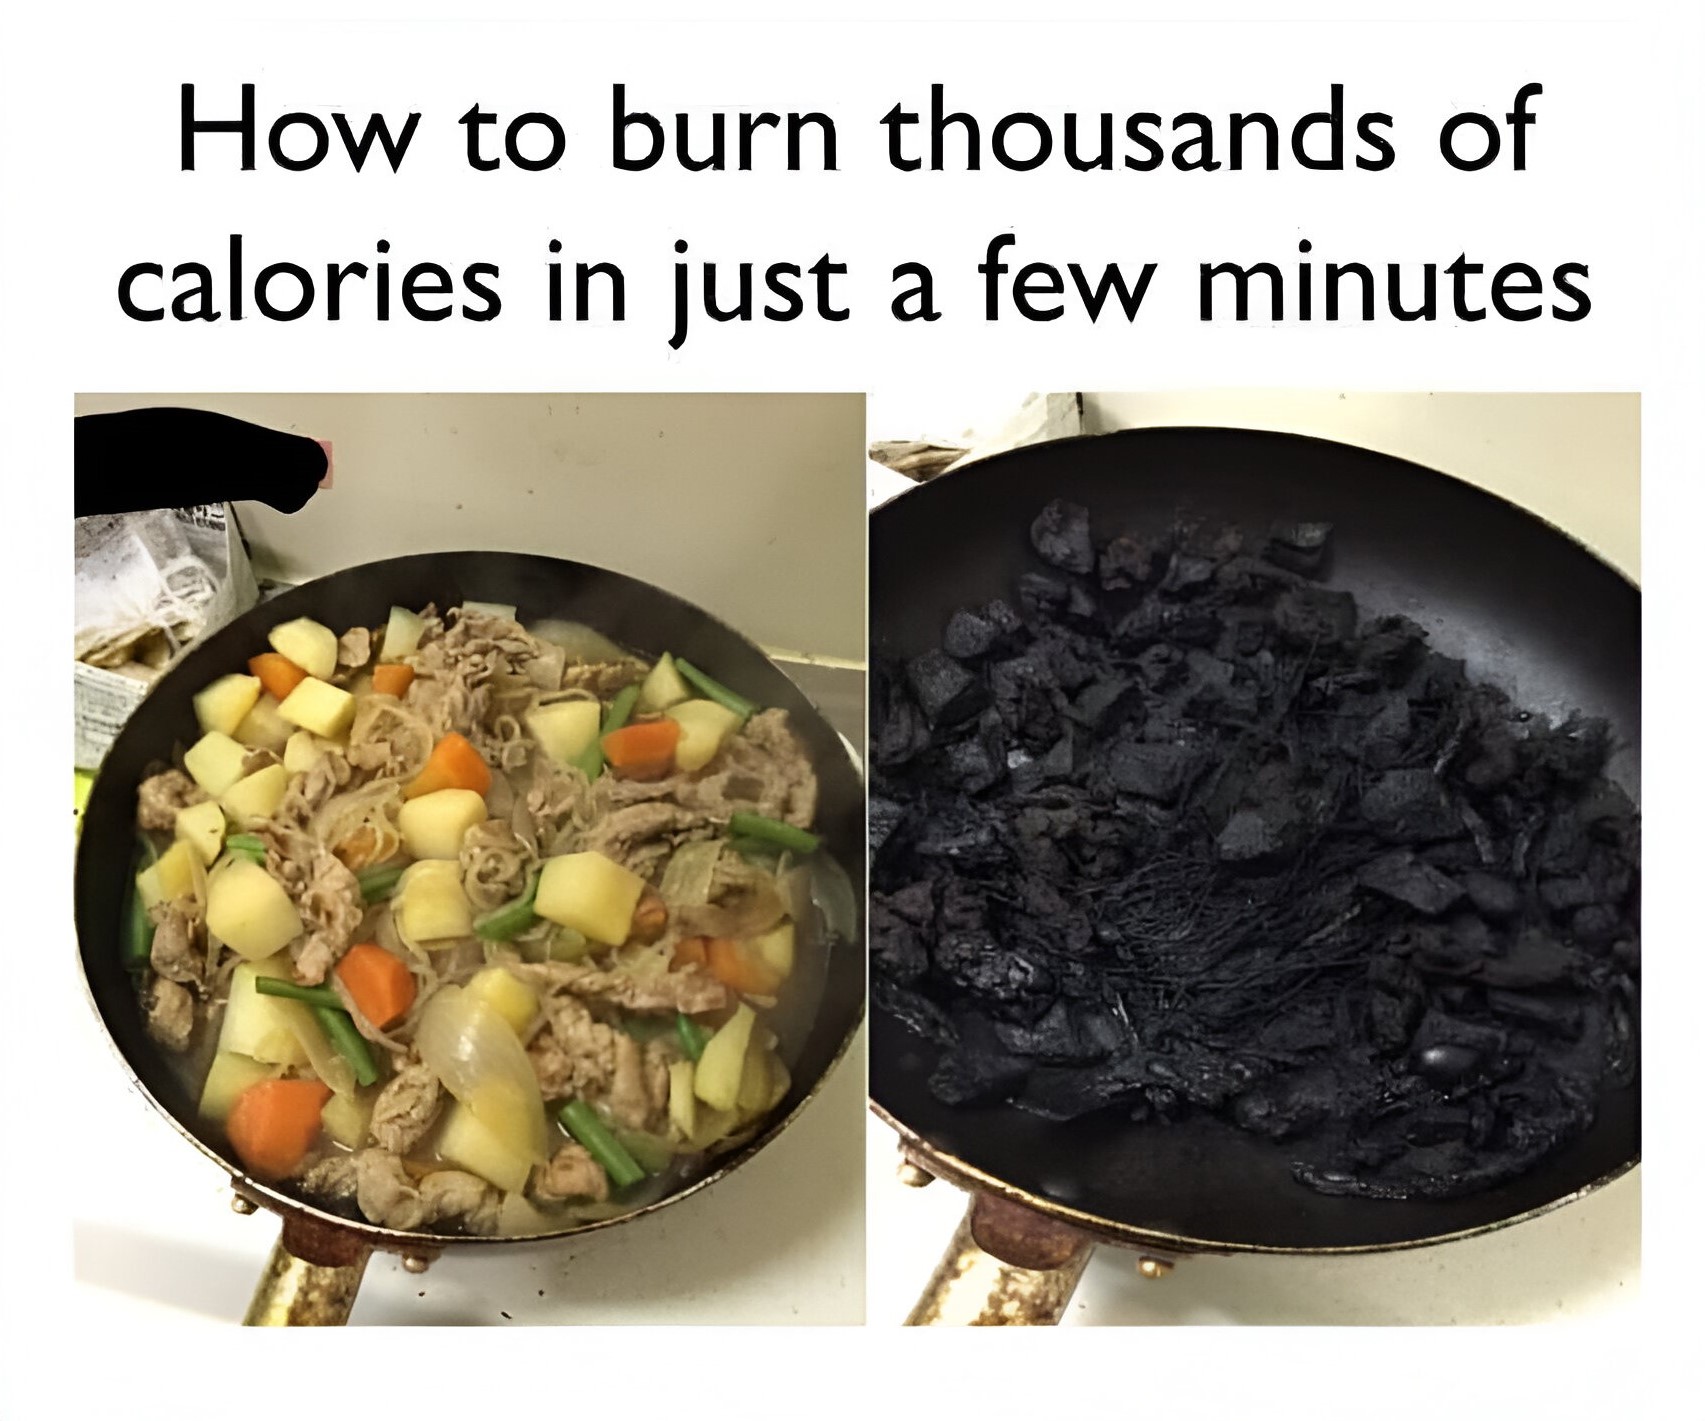 How to burn thousands of calories in just a few minutes